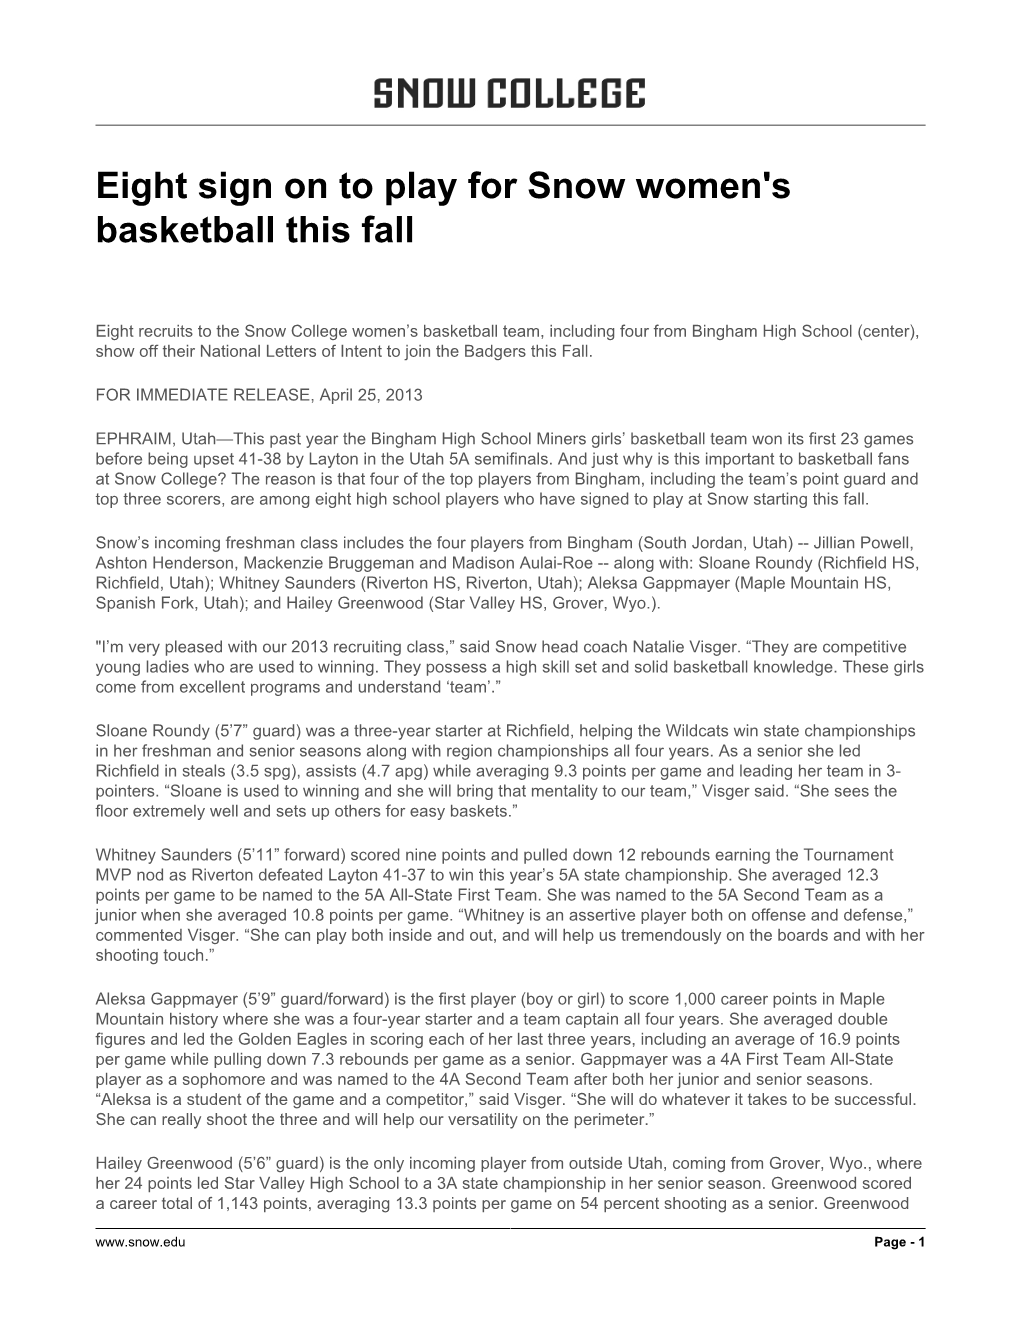 Eight Sign on to Play for Snow Women's Basketball This Fall